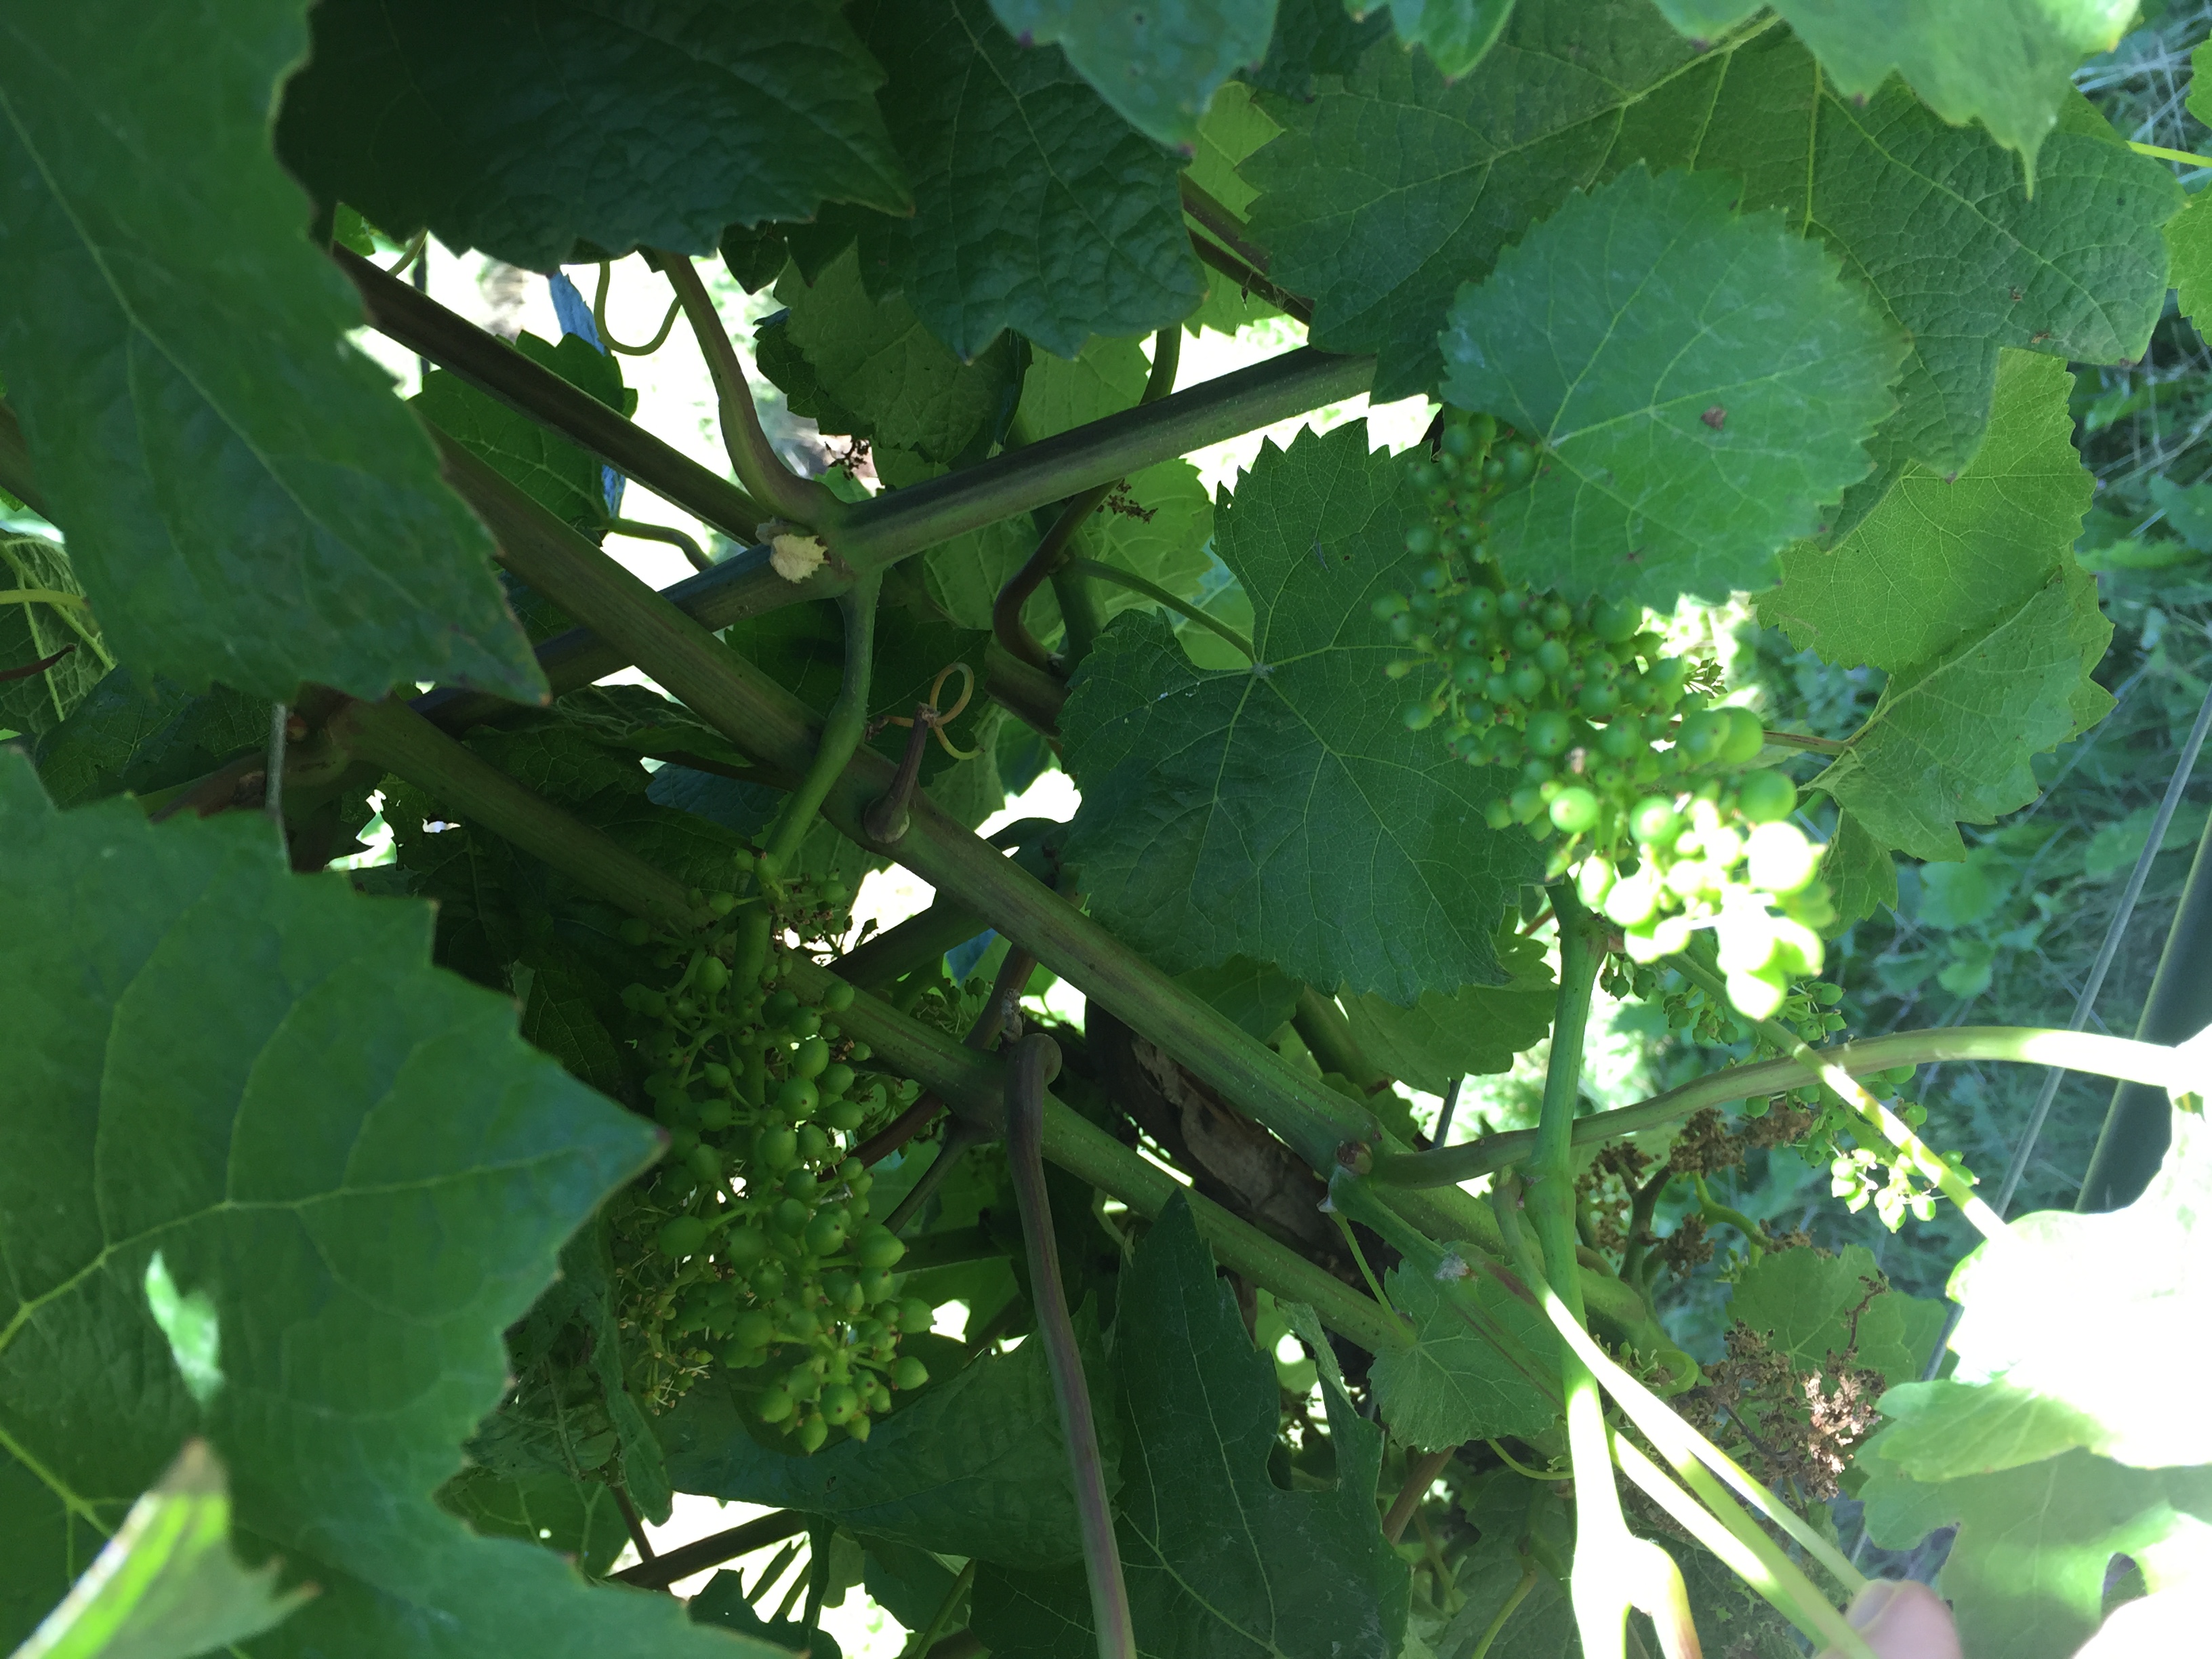 Image of grapes hanging underneath a canopy of leaves.